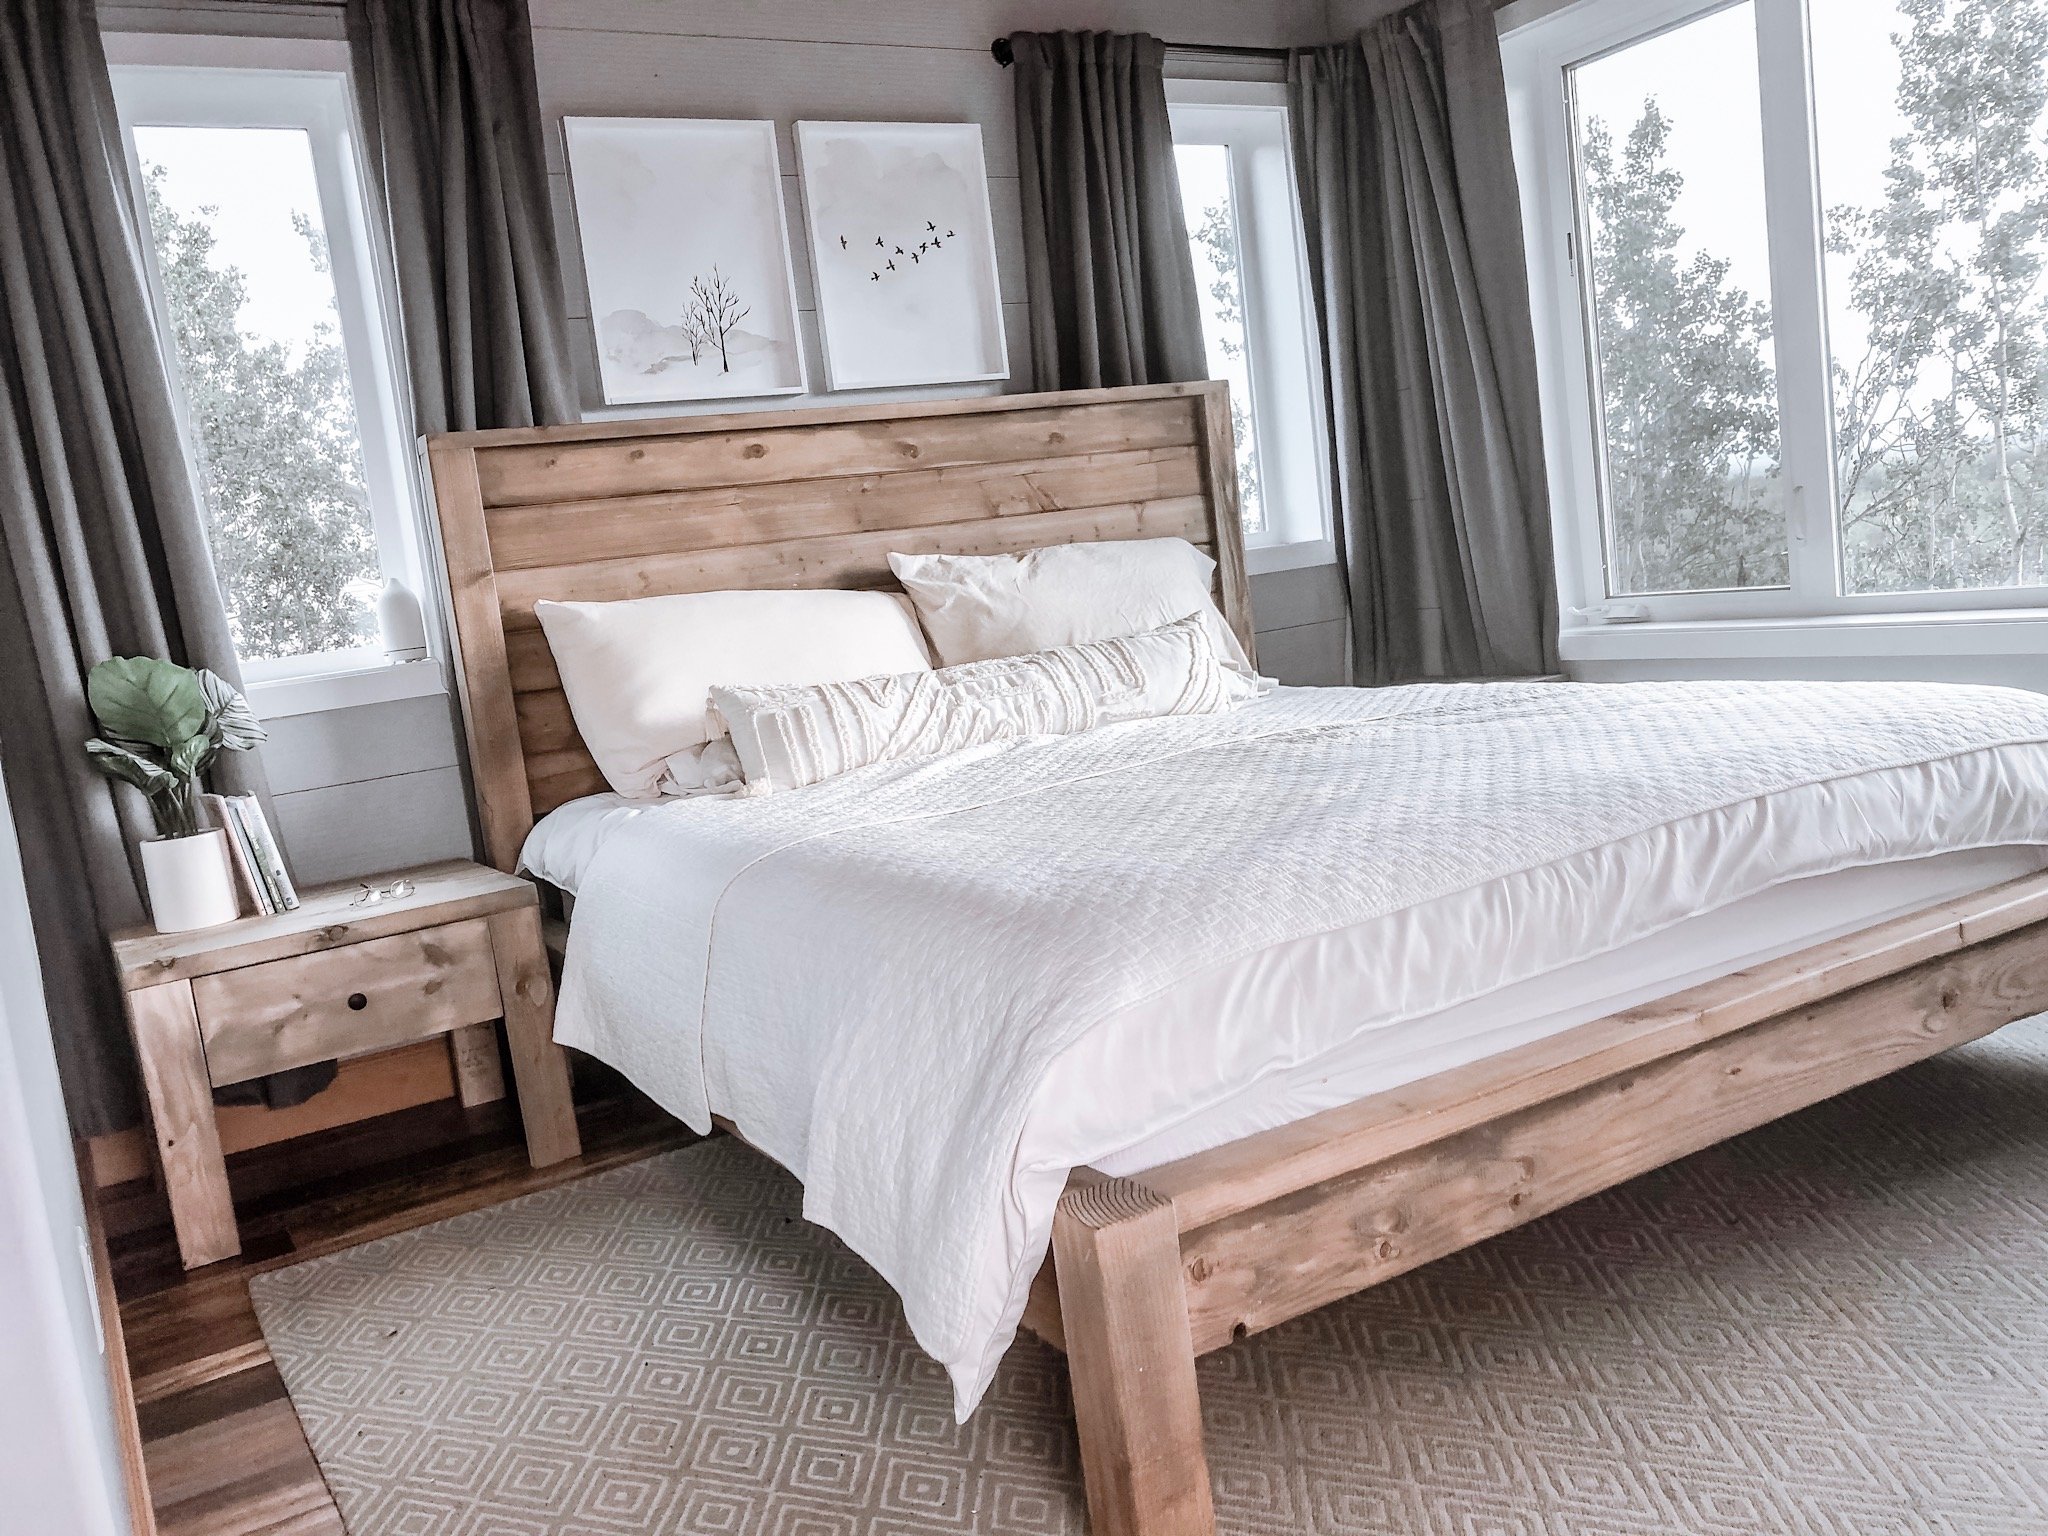 Modern Farmhouse Bed Frame Ana White, Rustic Queen Bed Frame Diy